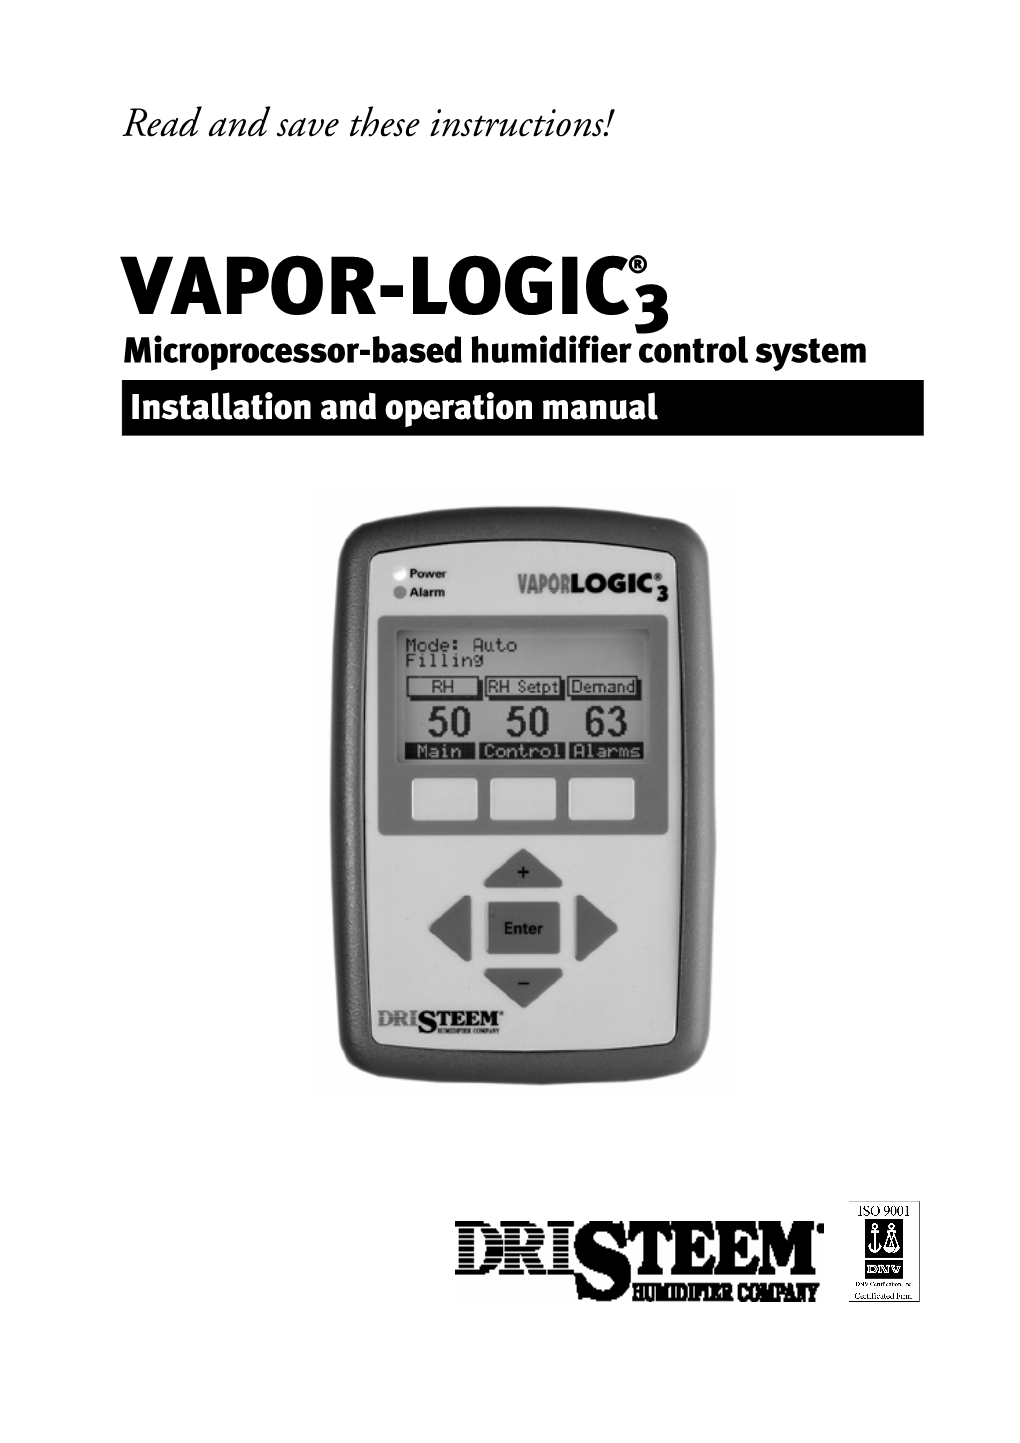 VAPOR-LOGIC®3 Microprocessor-Based Humidifier Control System Installation and Operation Manual